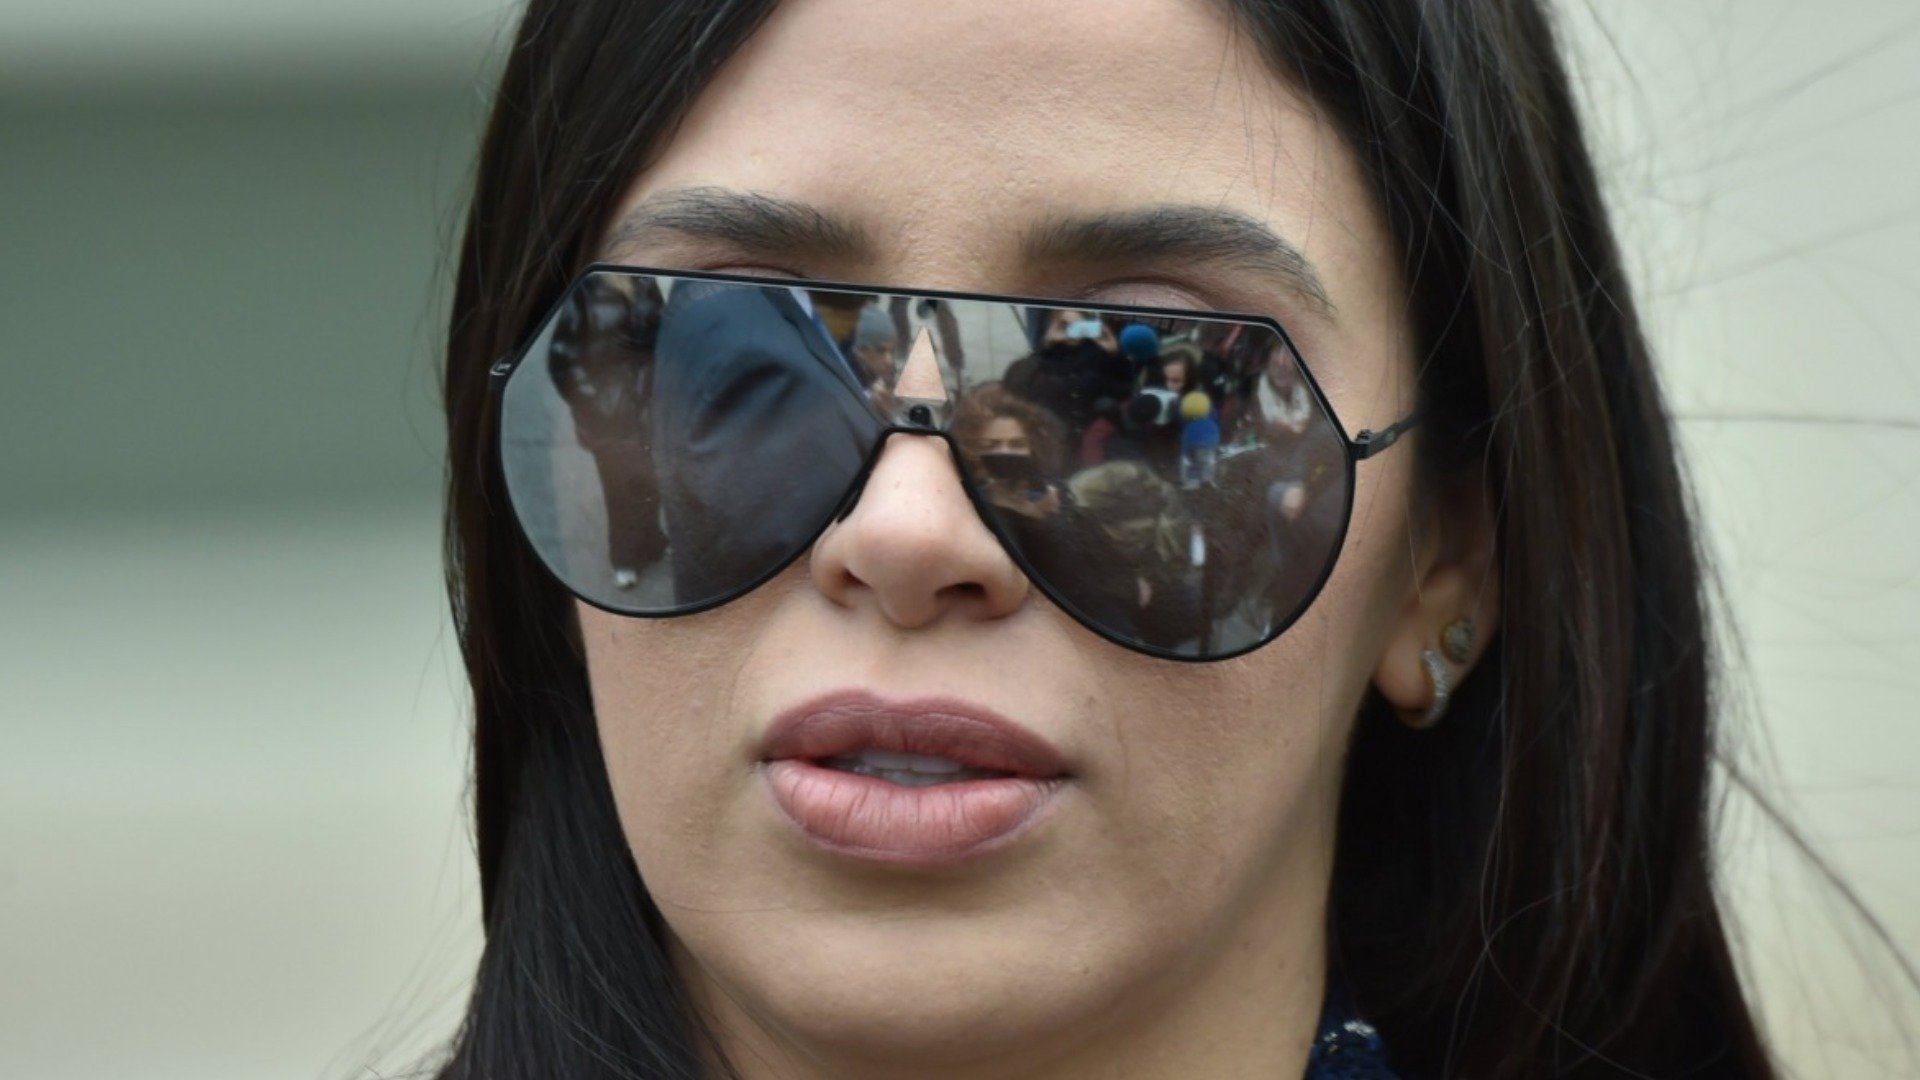 The Truth About El Chapo's Stunning Wife